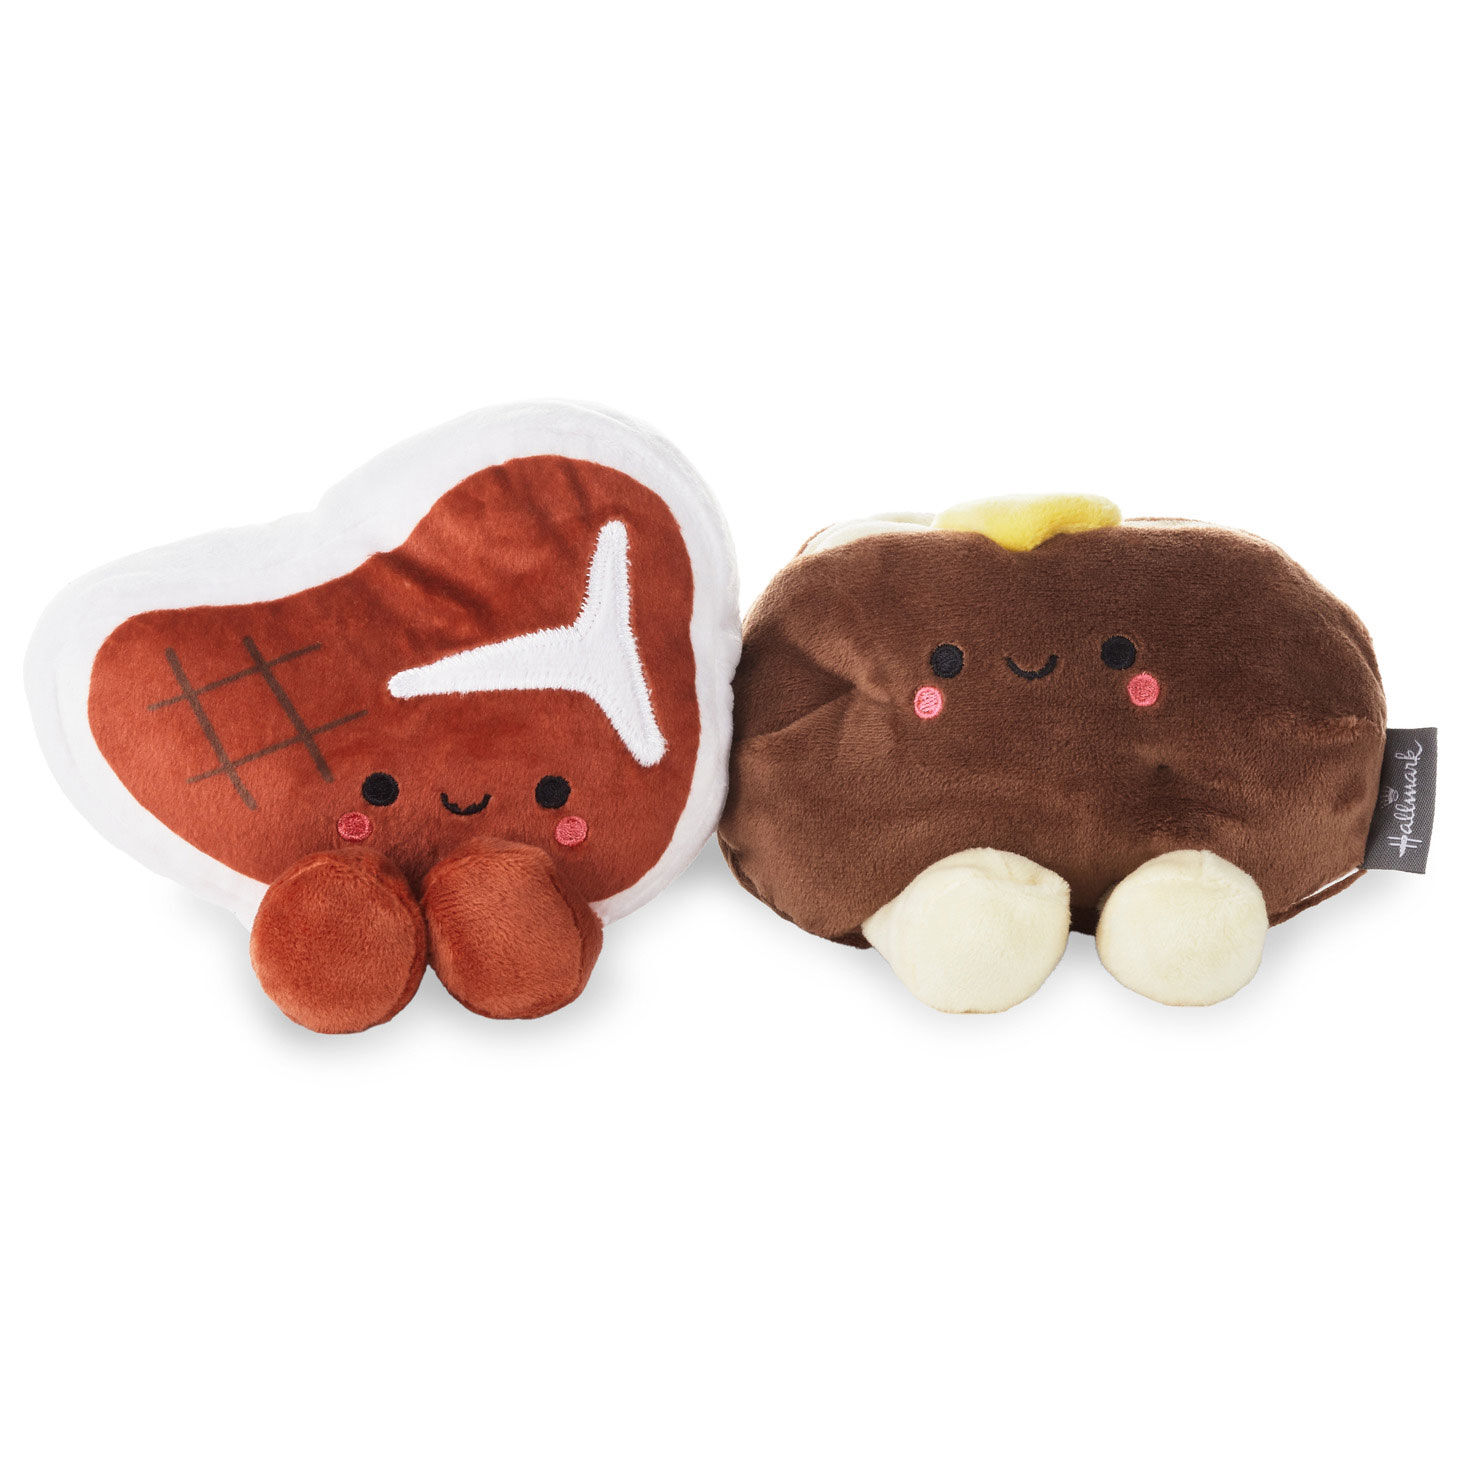 Better Together Steak and Potato Magnetic Plush, 4.25" for only USD 16.99 | Hallmark